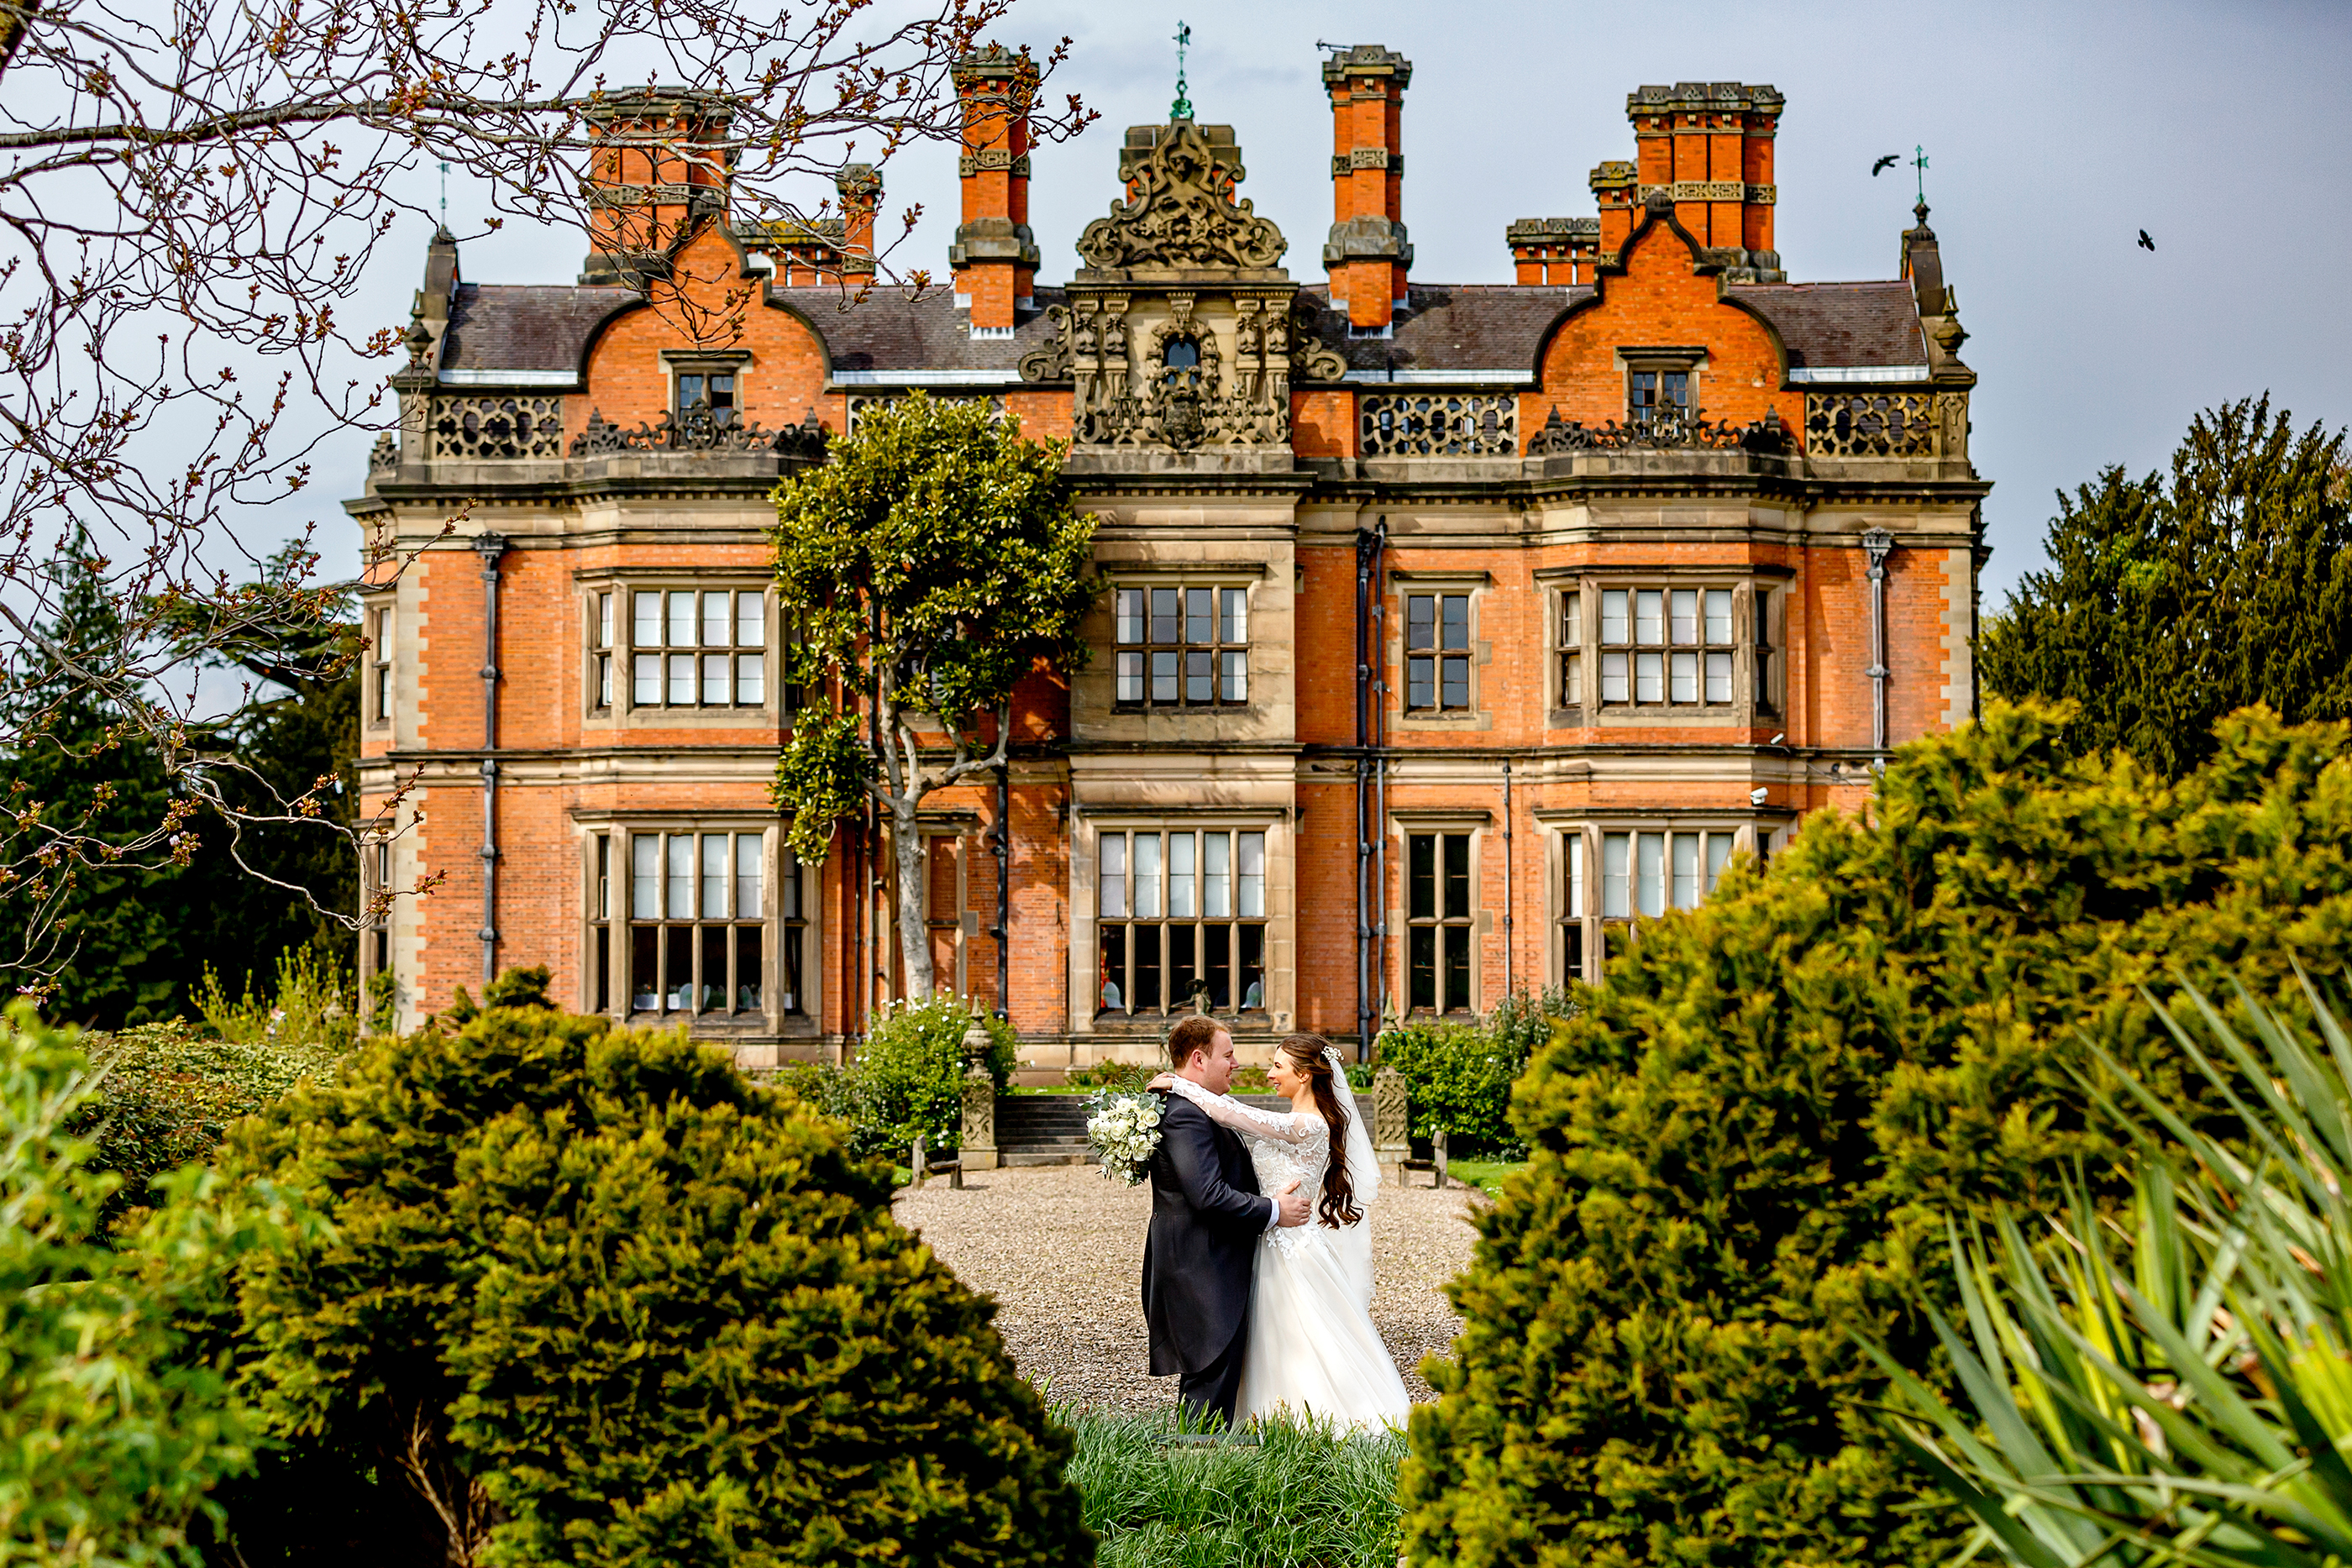 Your Wedding Day At Beaumanor Hall – Explained